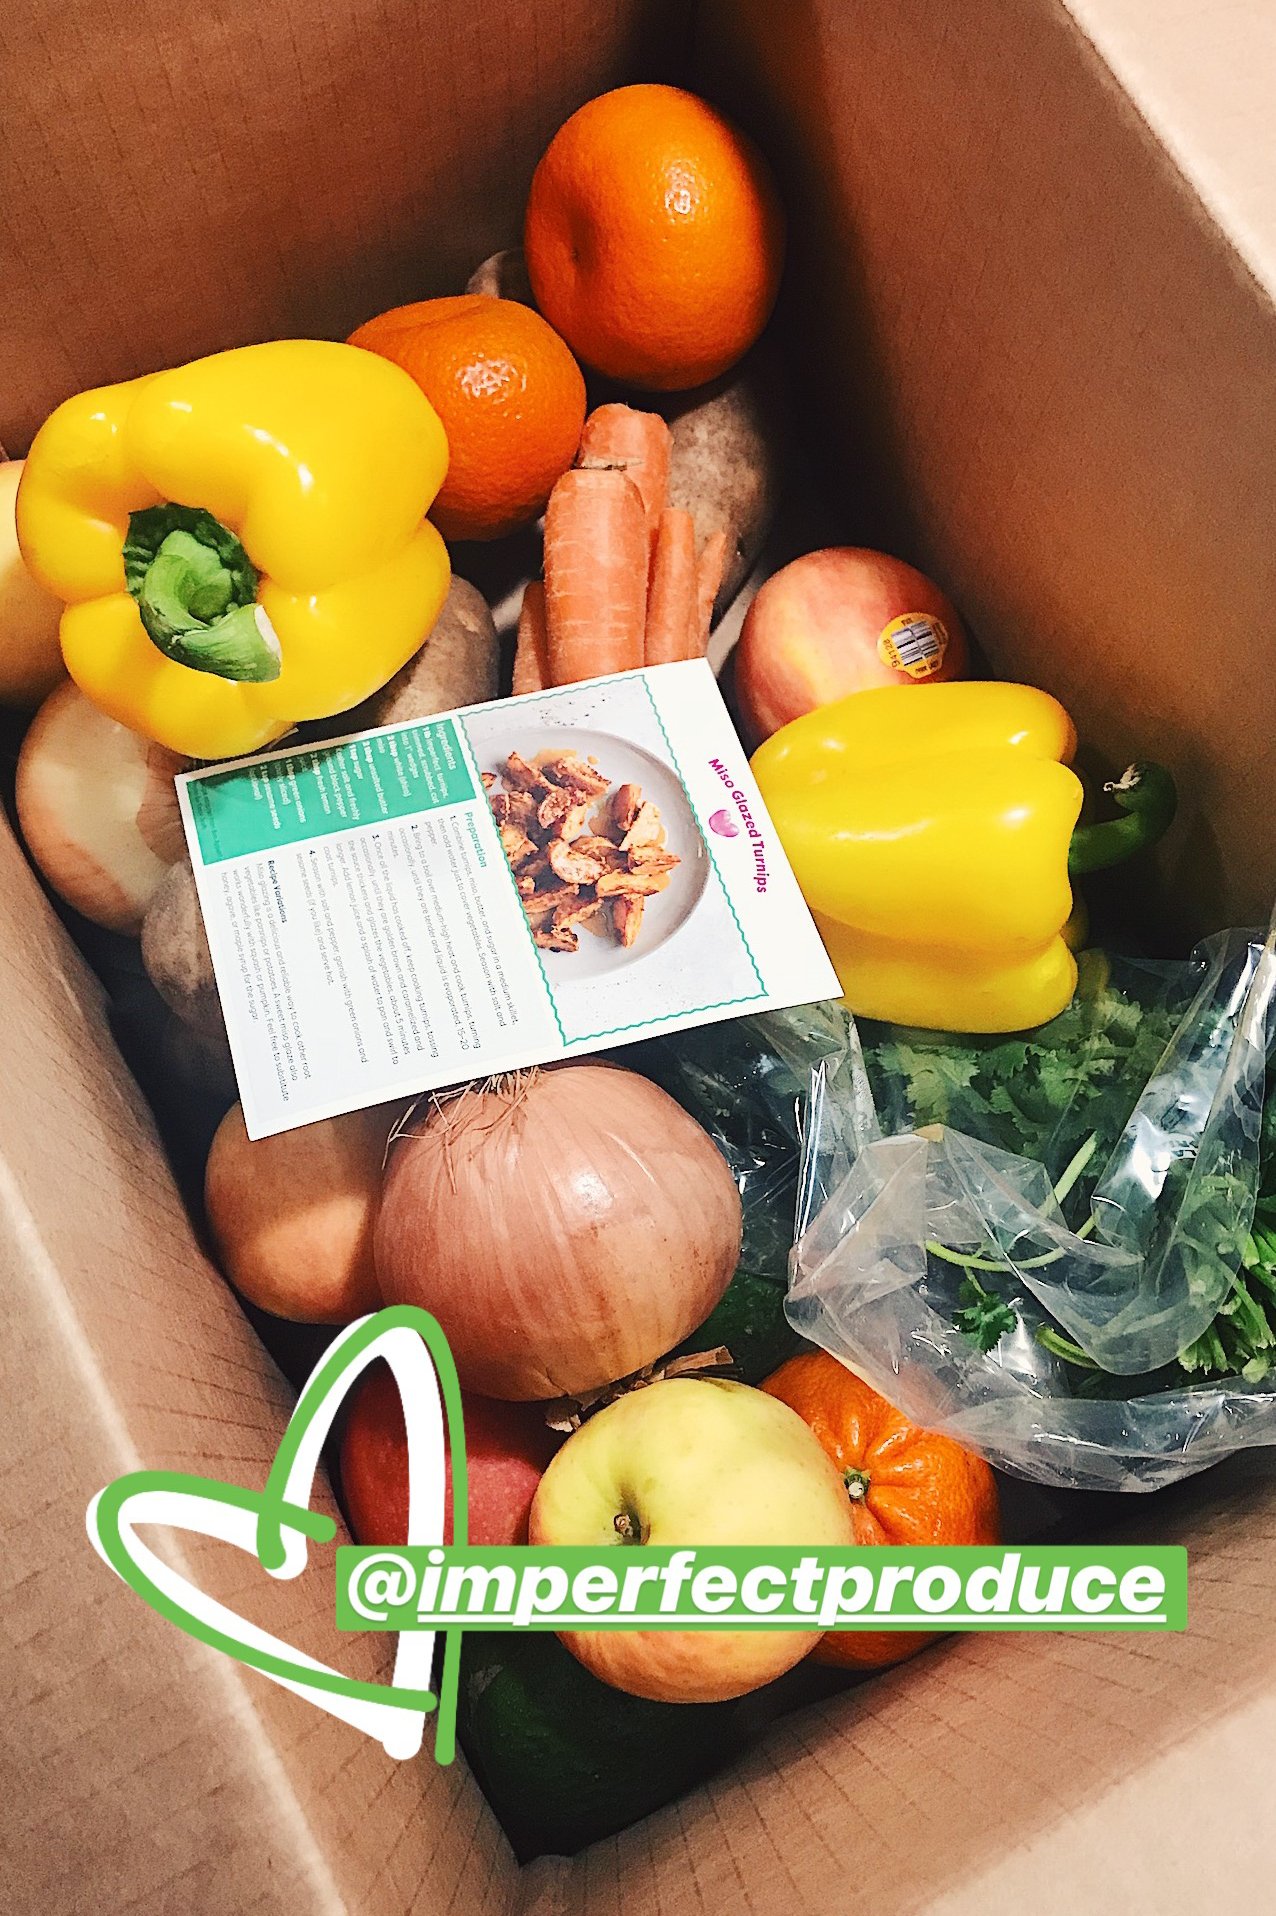 A box of fresh produce from Imperfect Produce.